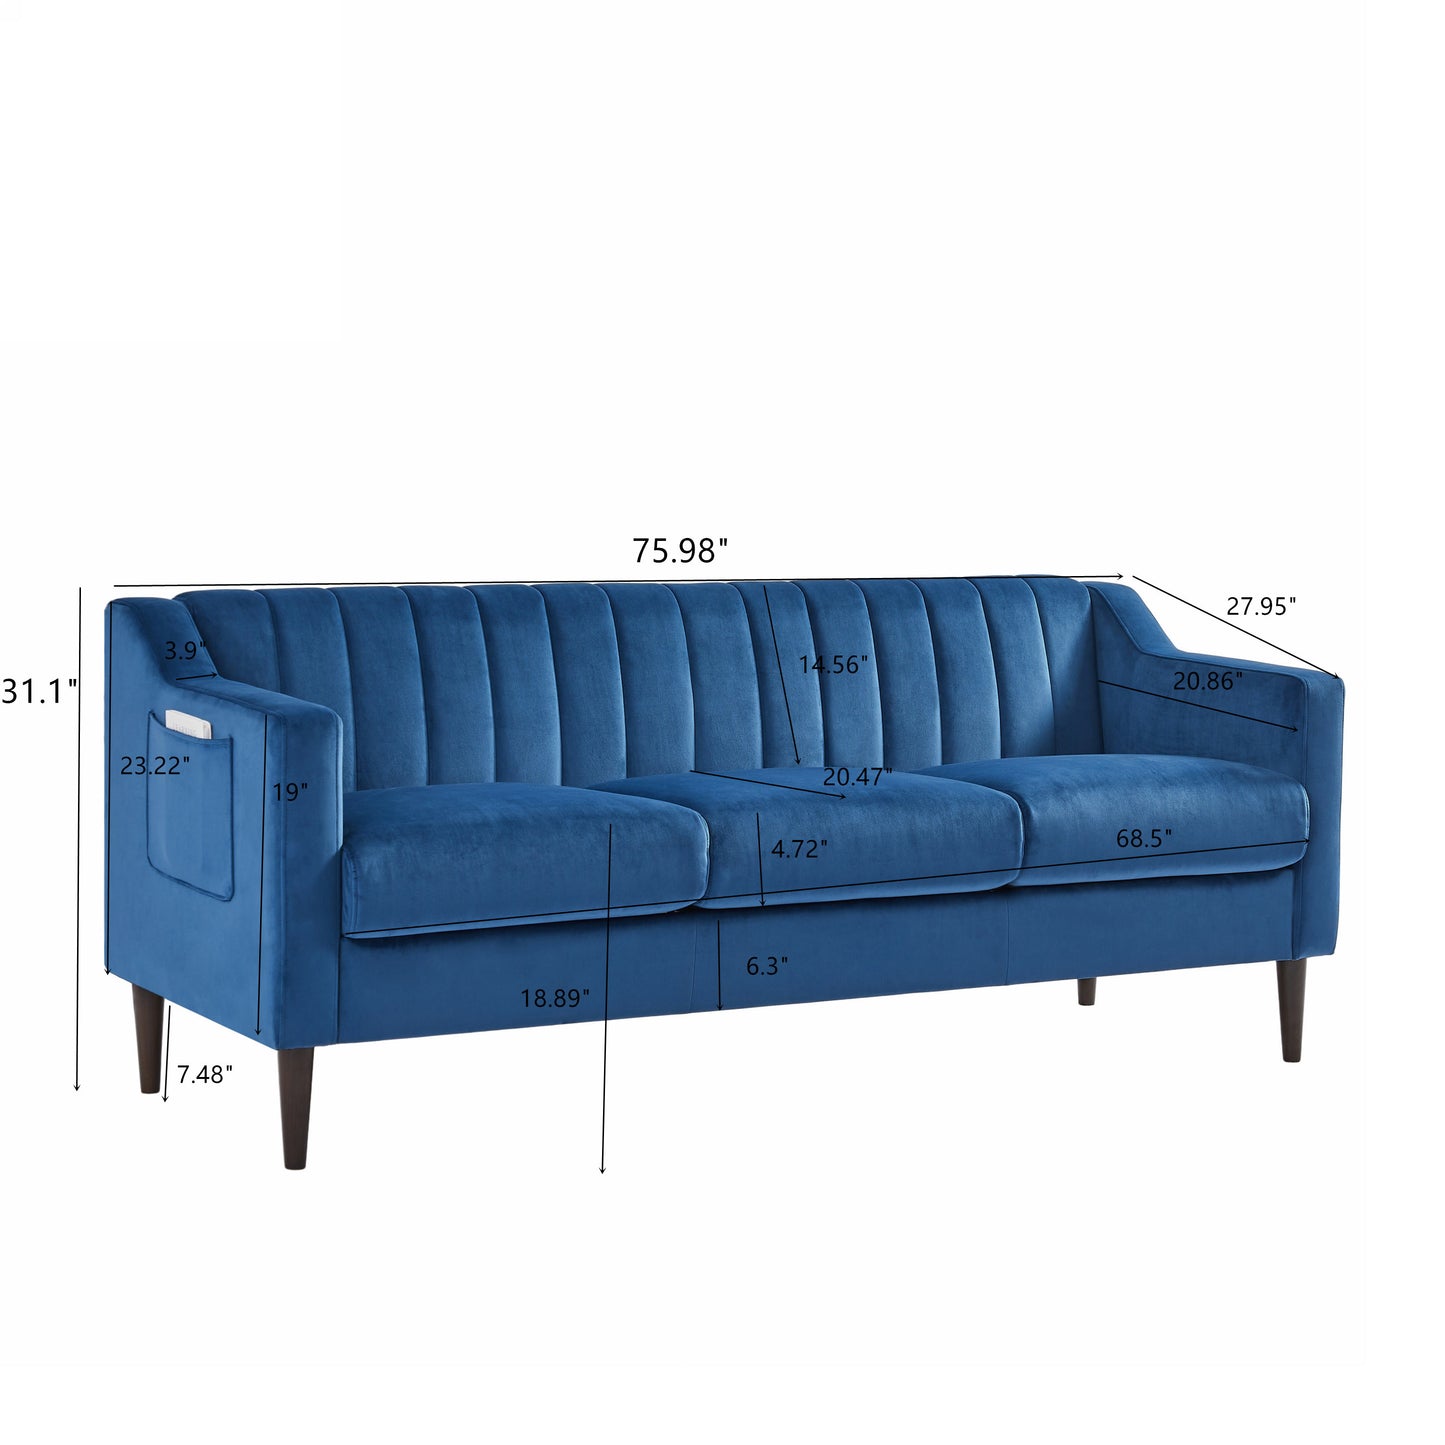 Modern Chesterfield sofa couch, Comfortable Upholstered sofa with Velvet Fabric and Wooden Frame and Wood Legs for Living Room/Bedroom/Office Blue --3 Seats